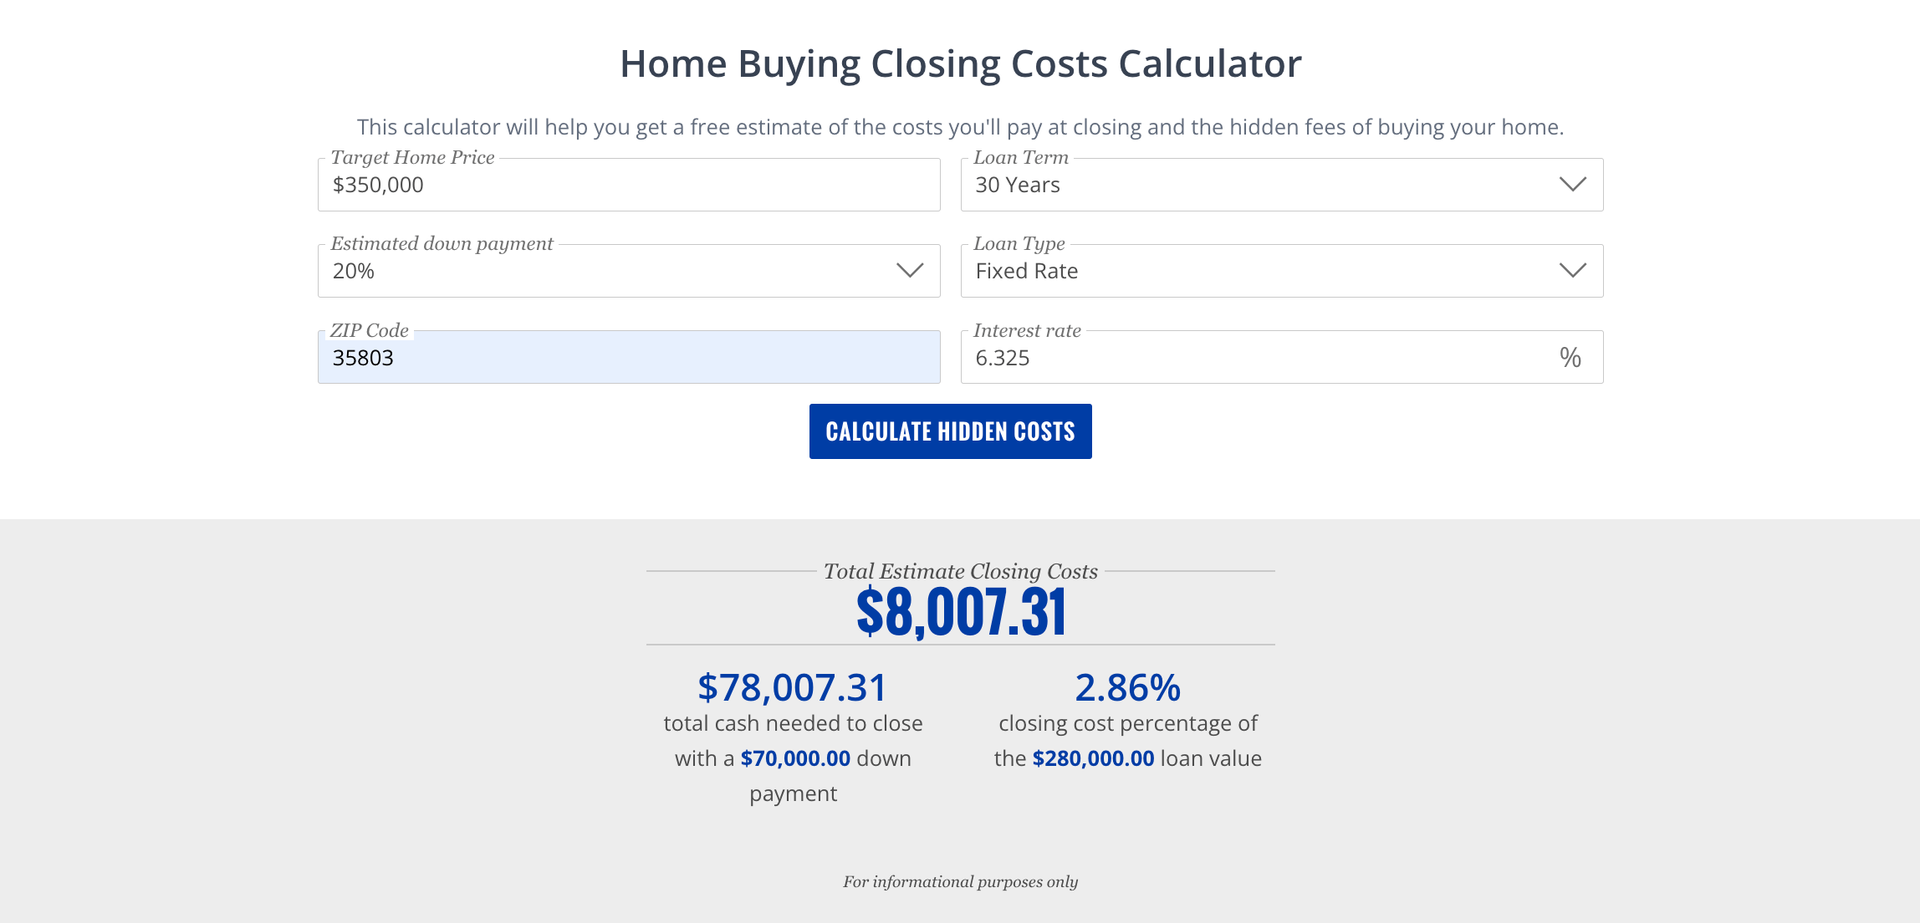 sample output of a closing costs calculator image